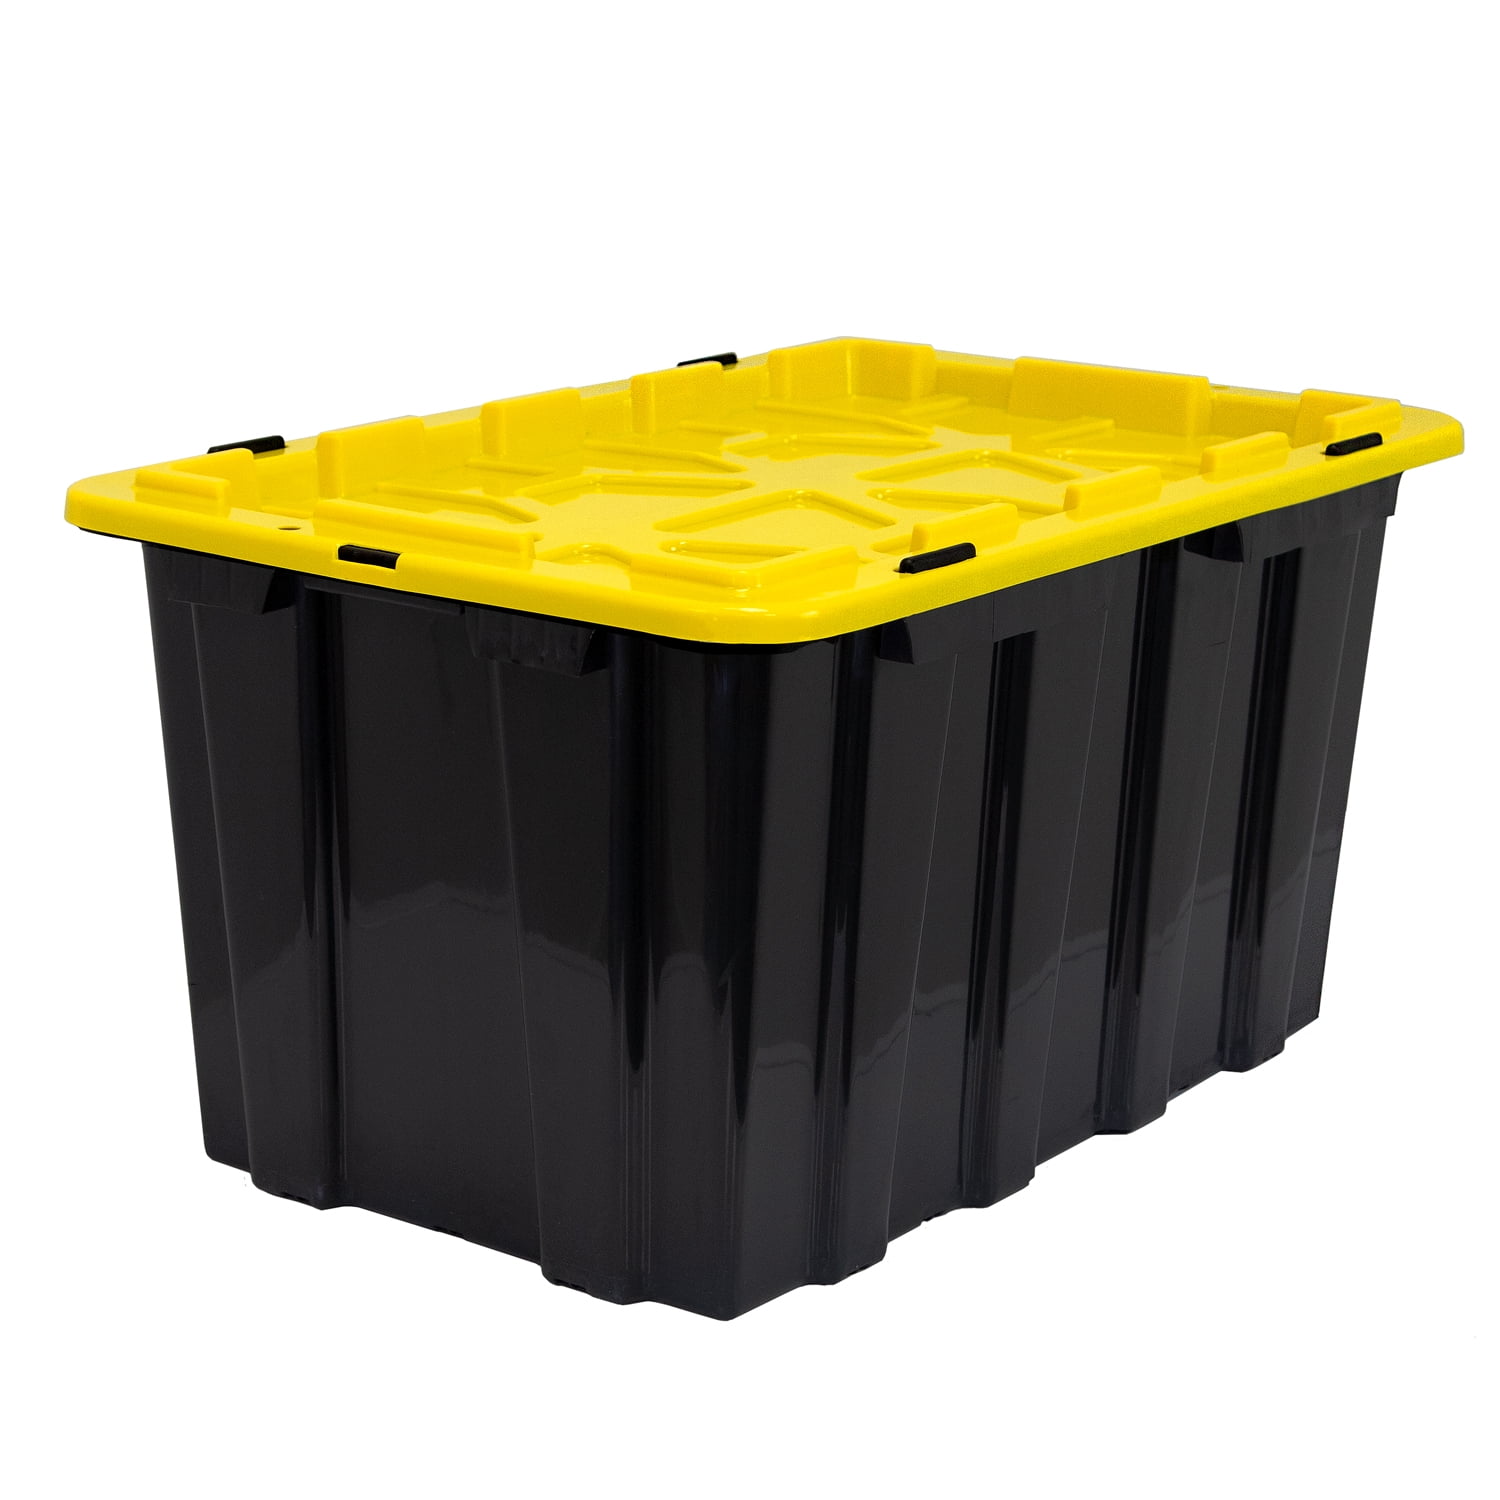 Buy 15 ML Black Storage Containers Online at Best Price with Spatty –  Spatty®